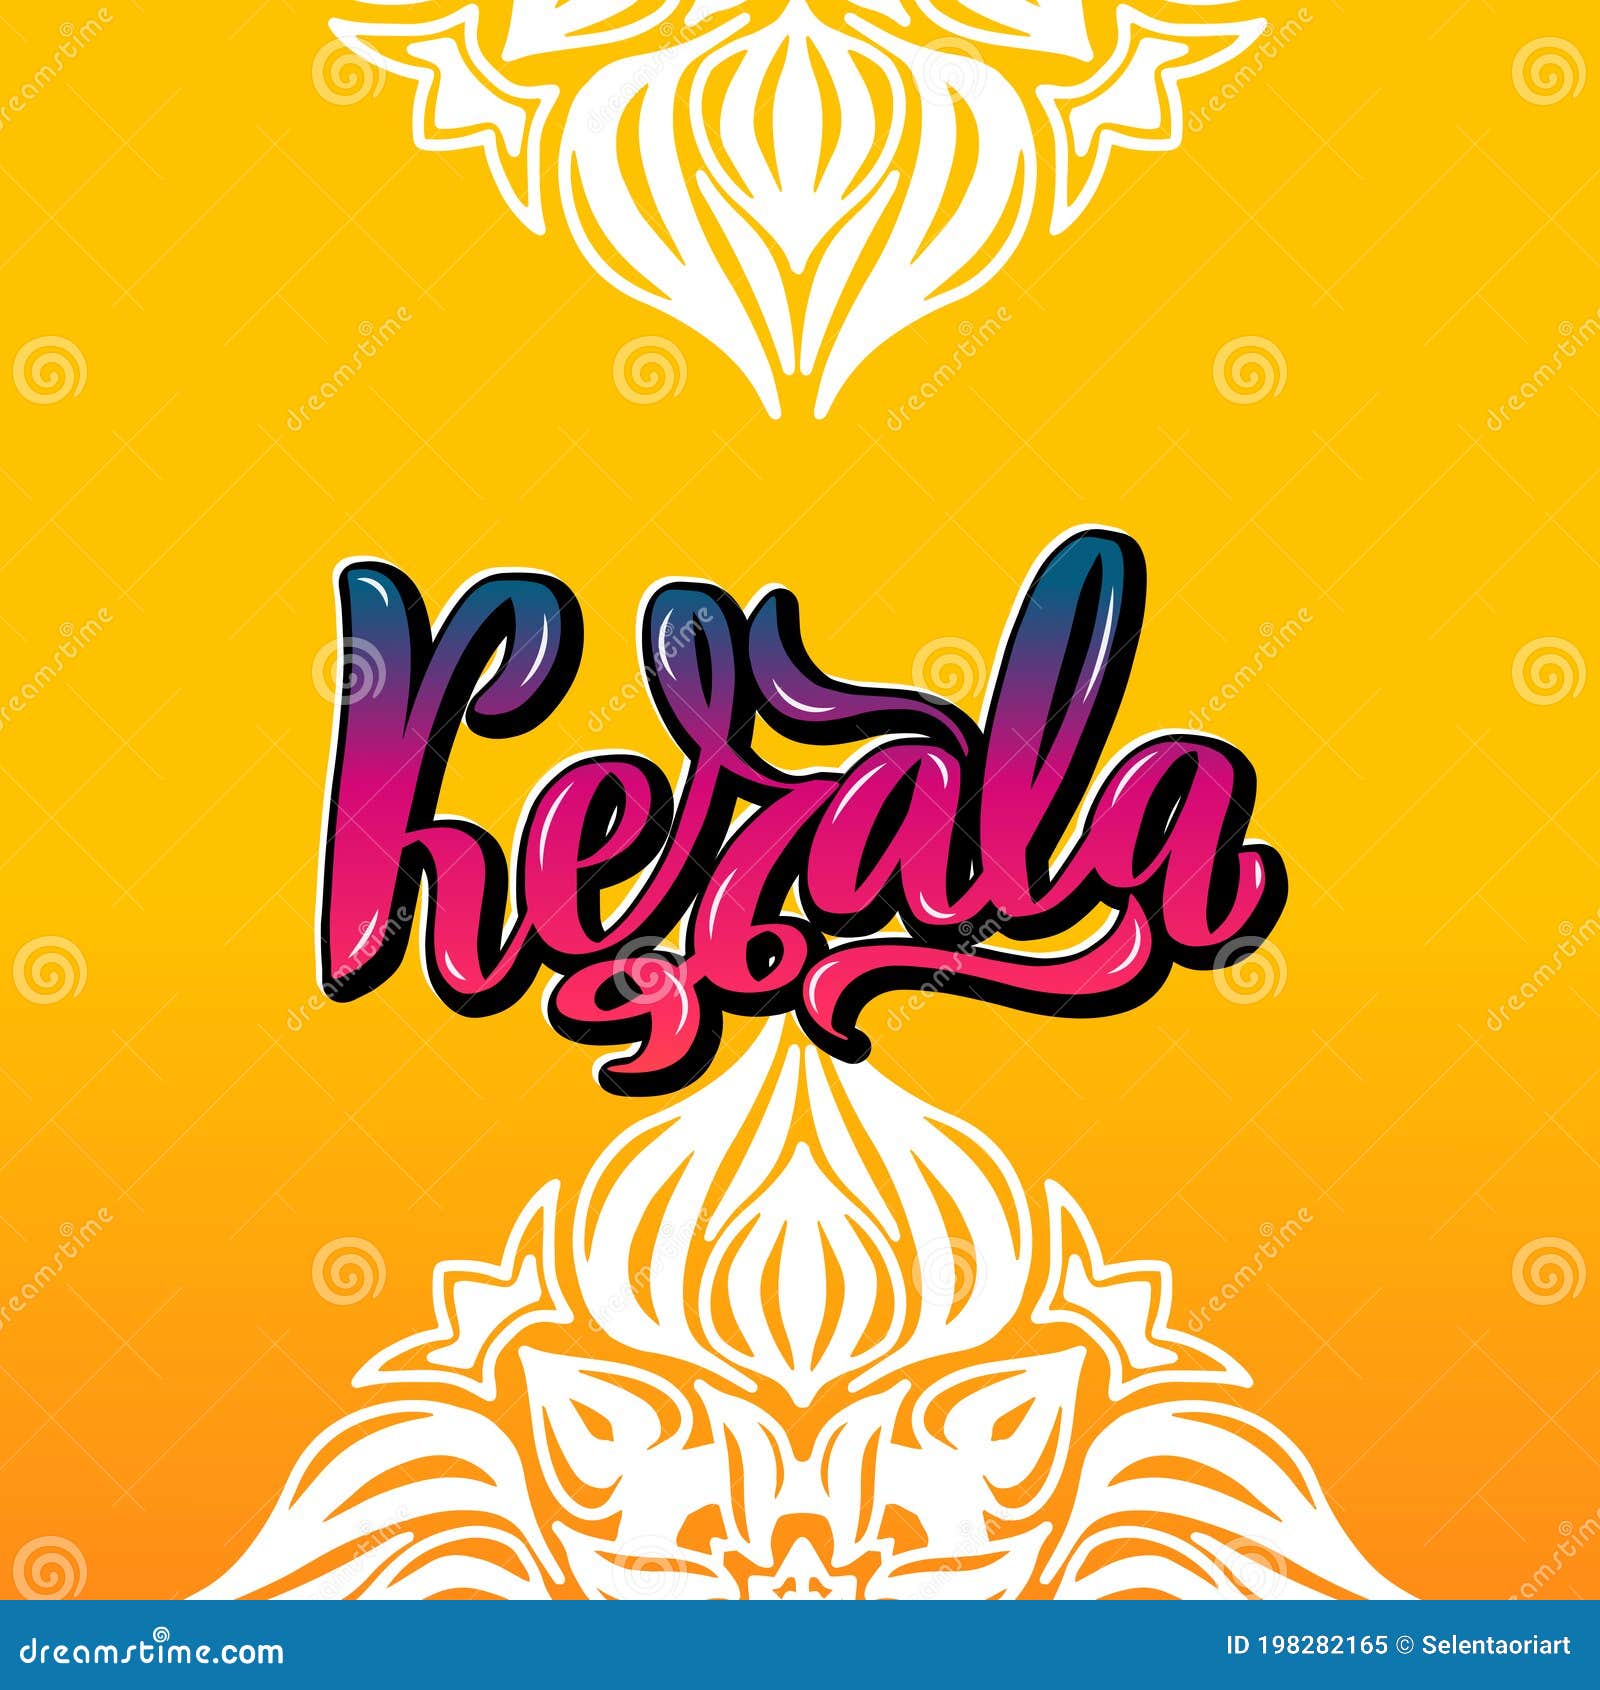 Kerala Handwritten Stock Lettering Typography. States of India Stock Vector  - Illustration of boat, alleppy: 198282165